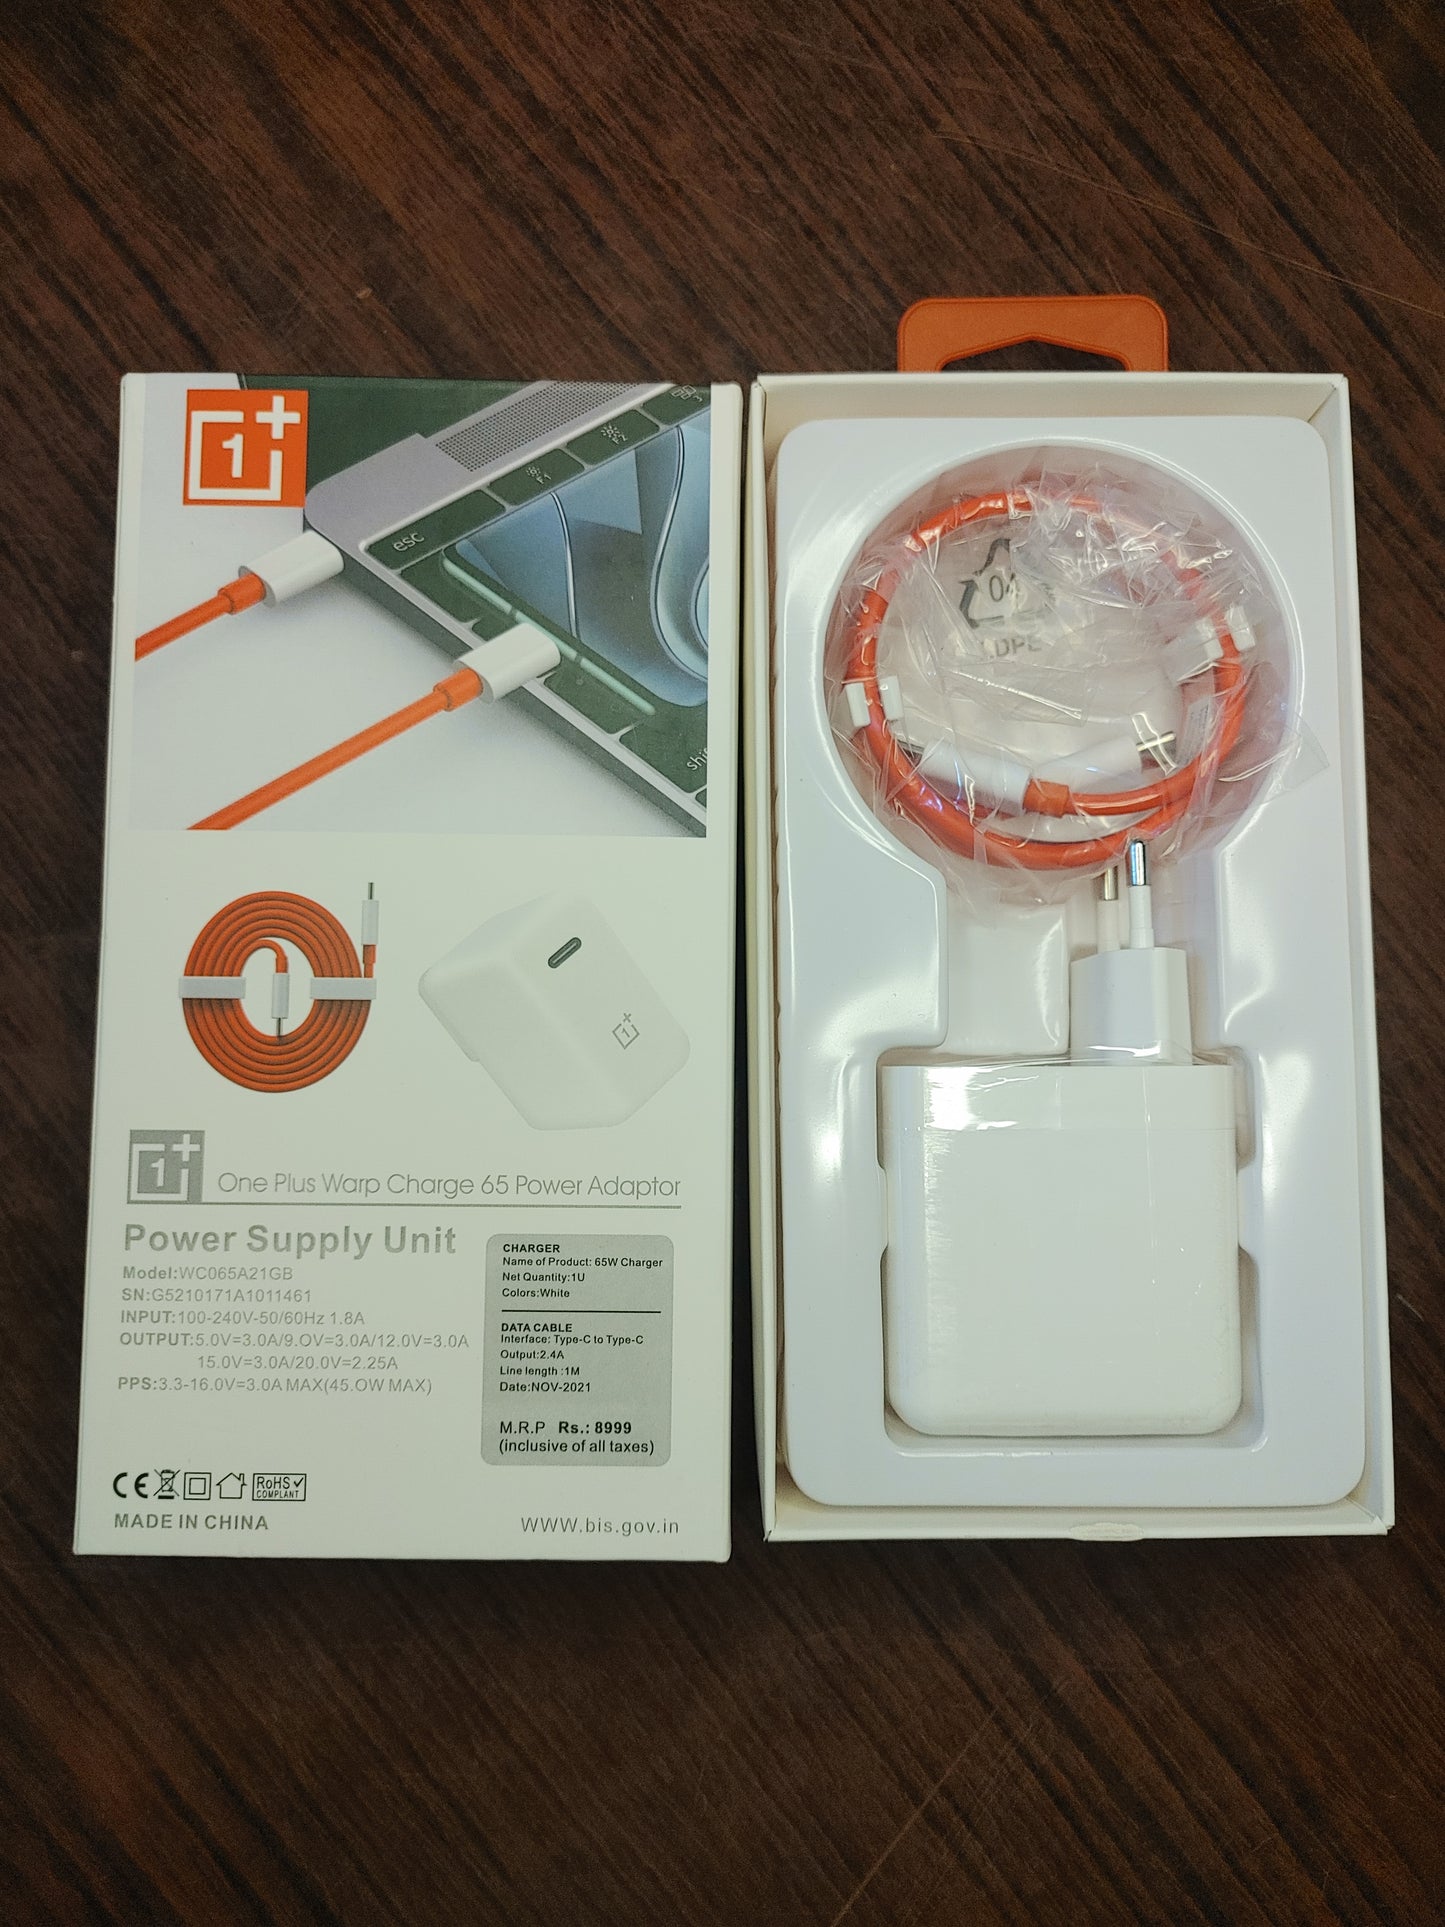 One Plus Charger 100% Original Box Pack Imported Charger